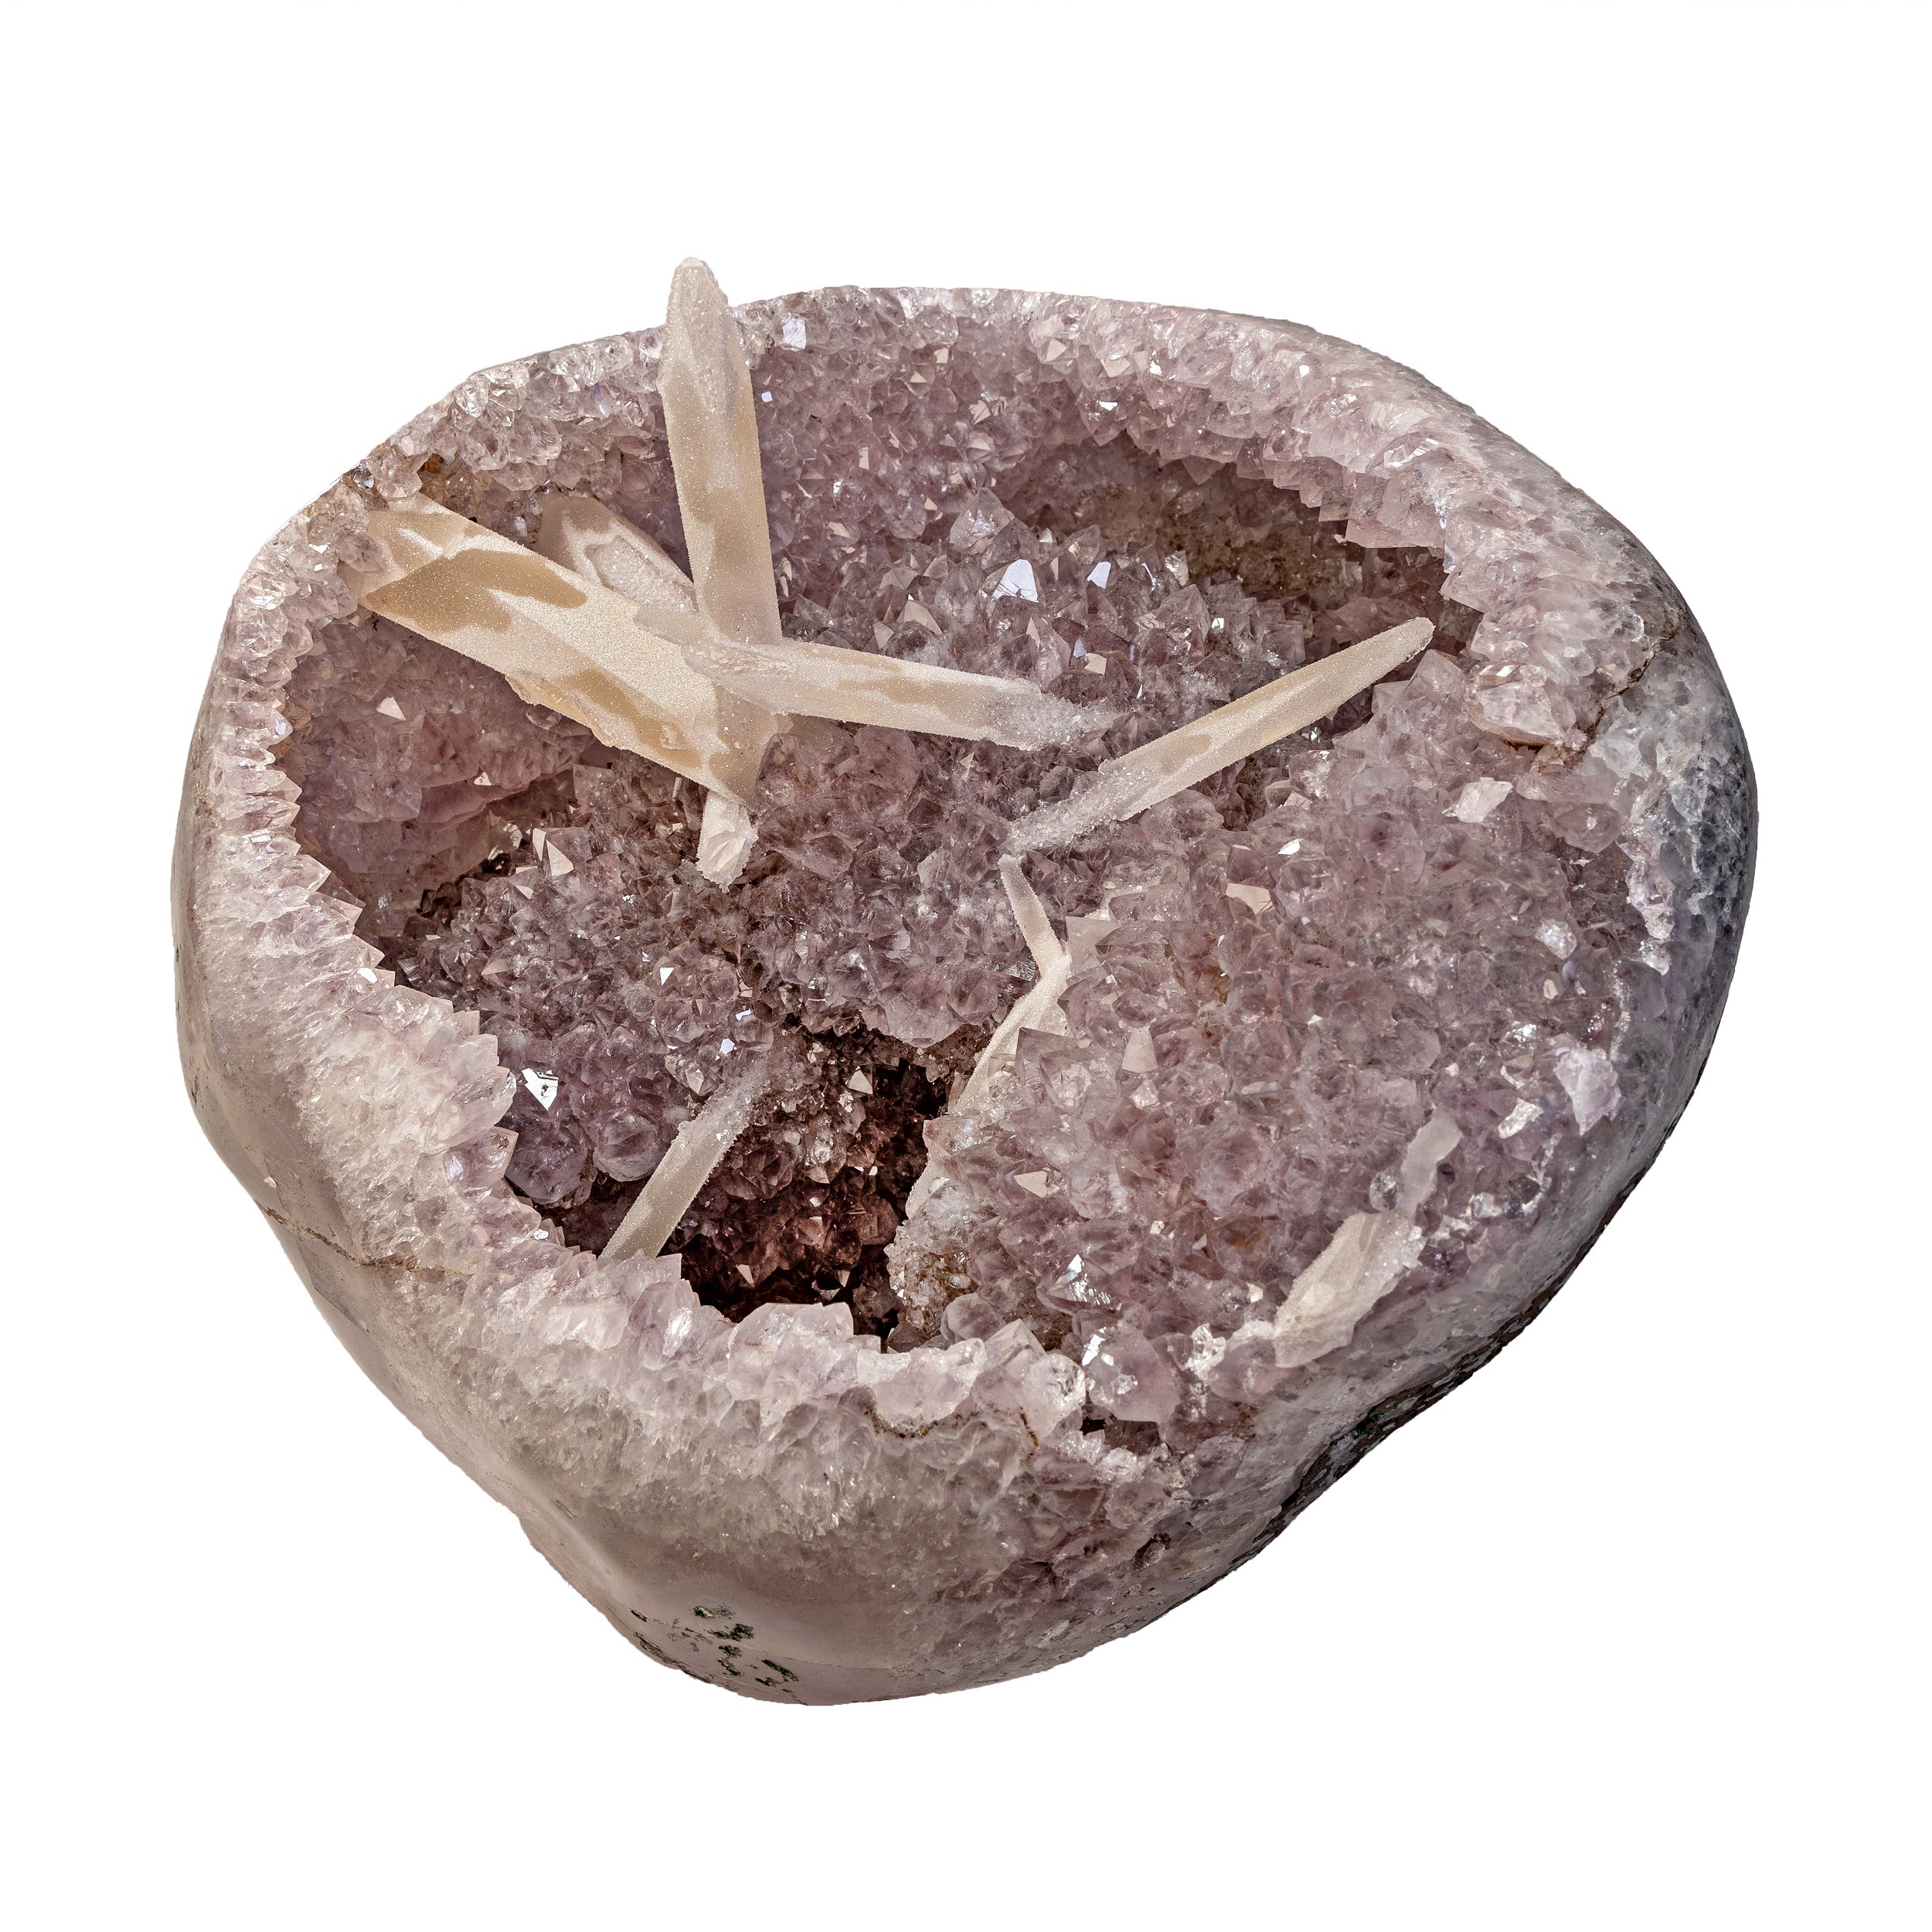 Rose De France Geode With Calcite Bridge Crystals Inclusions And Cut Base